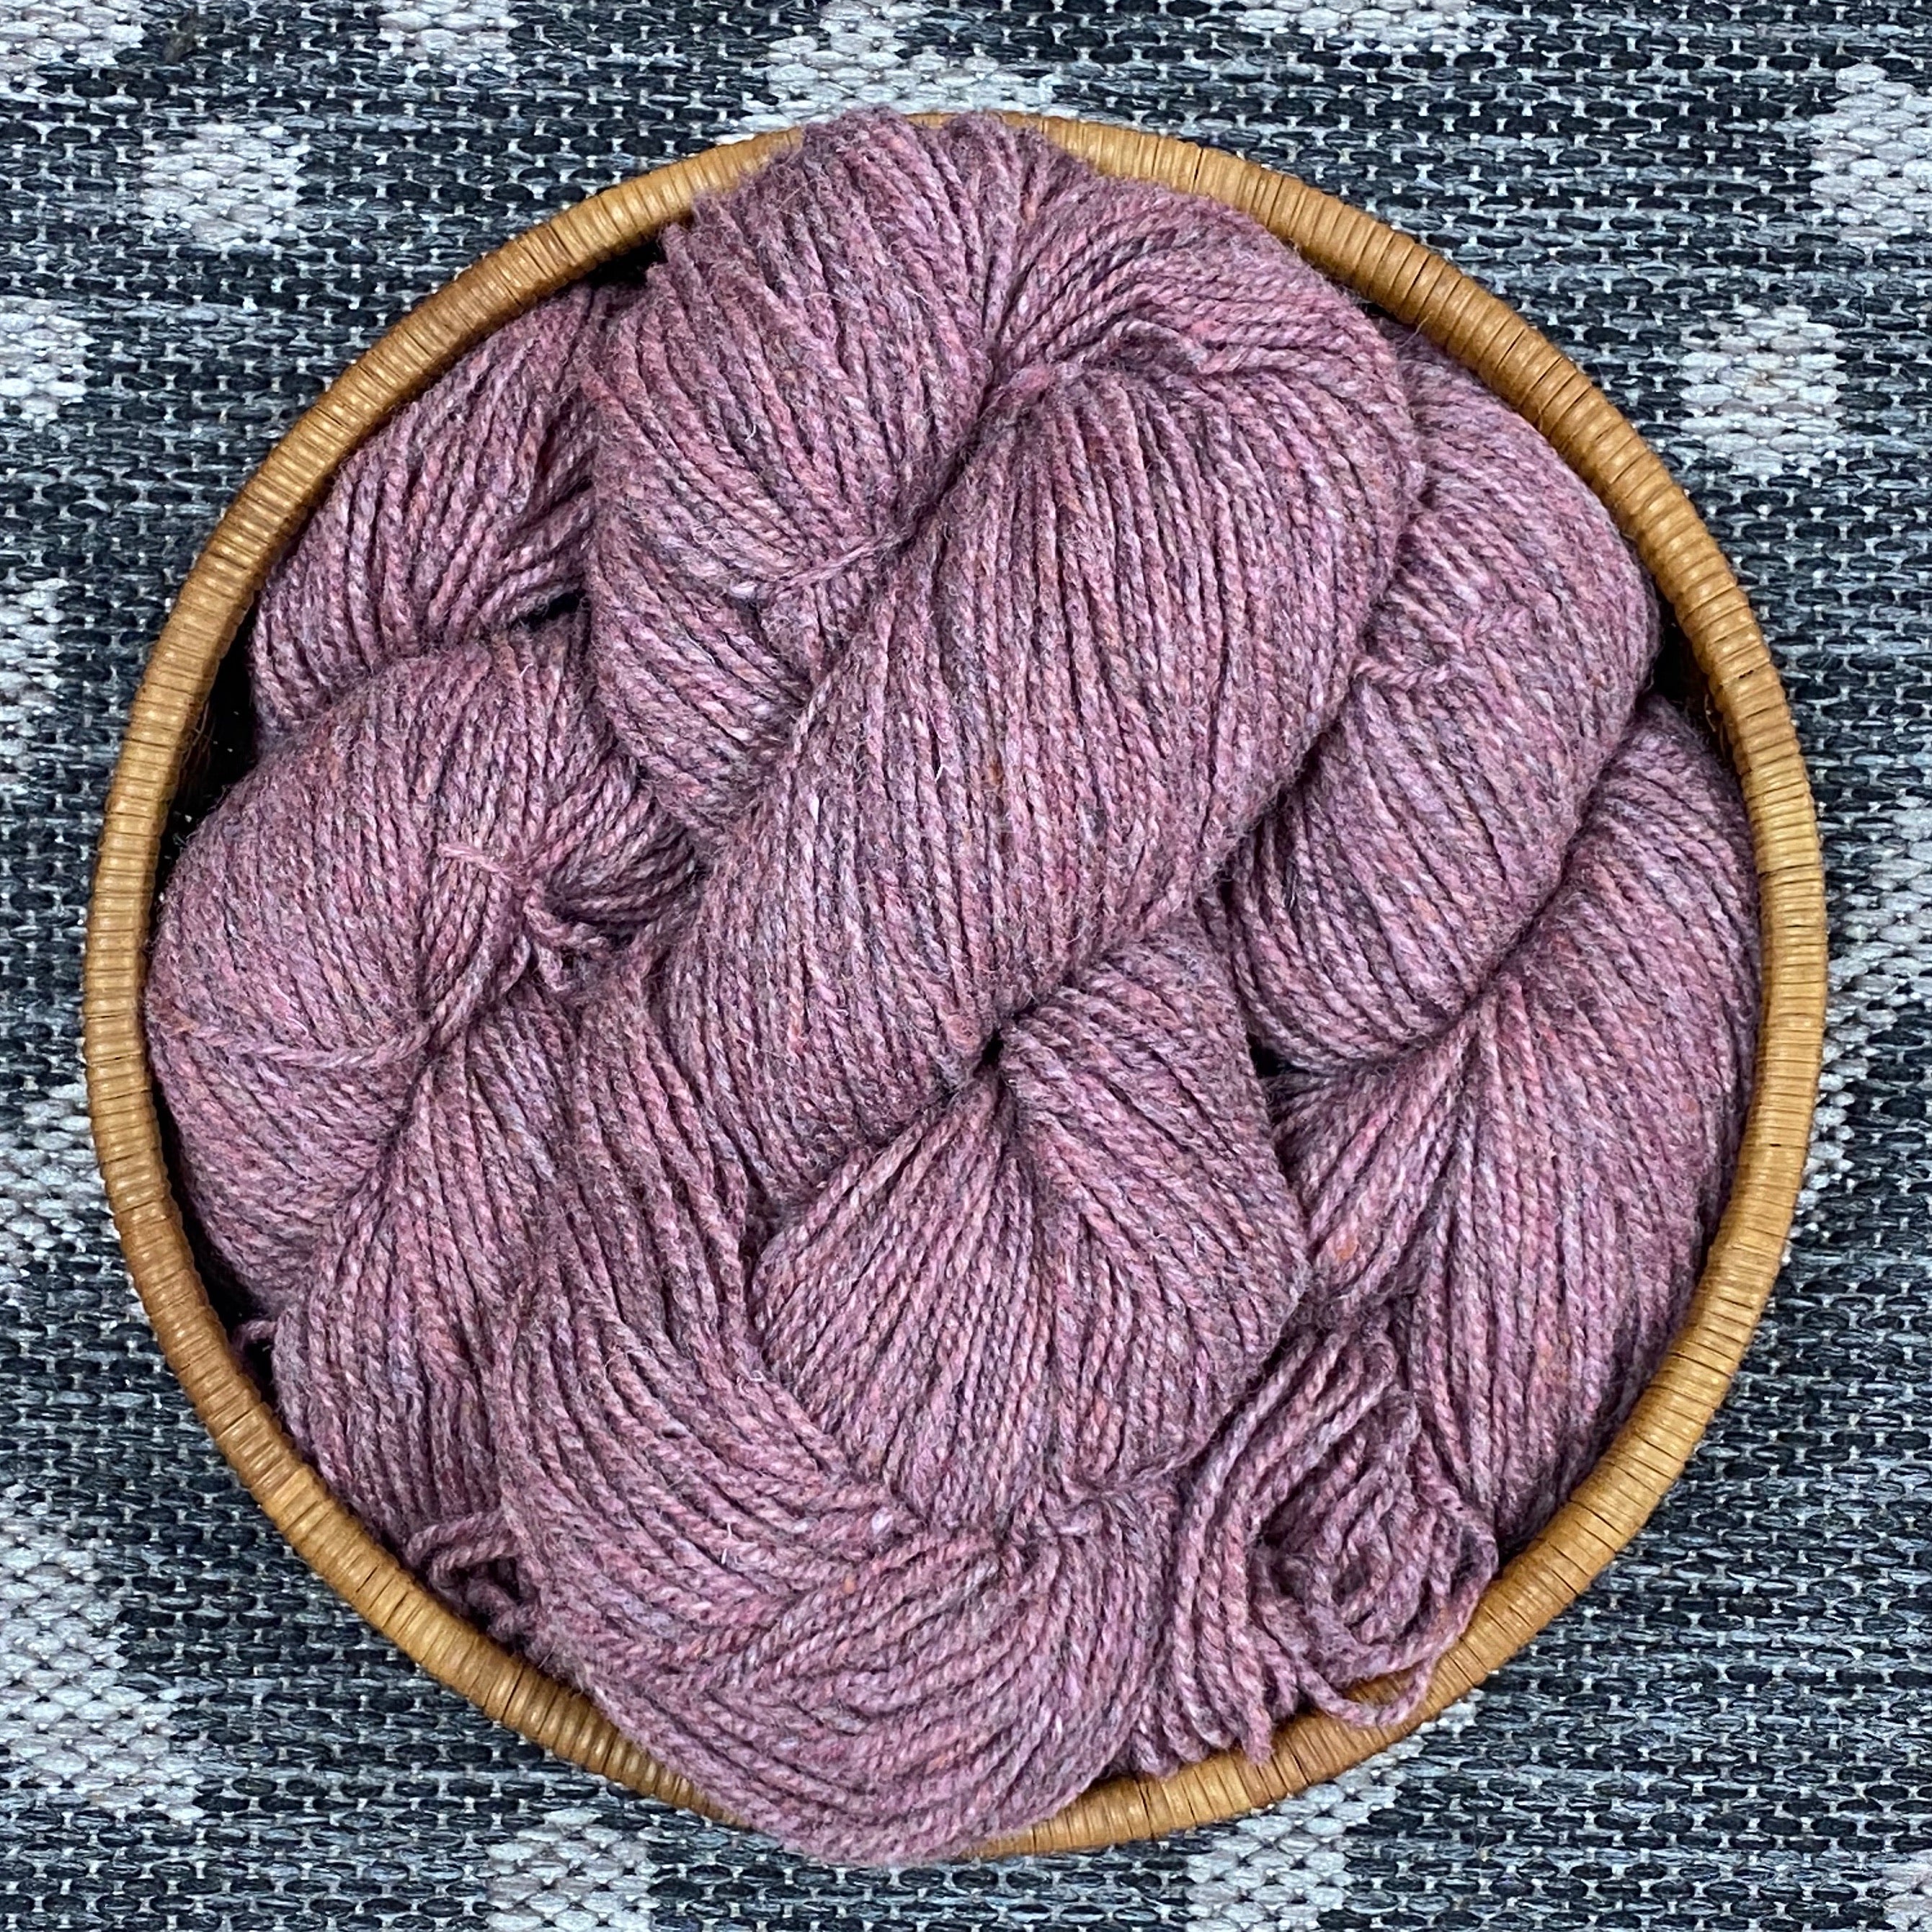 Briggs and Little 100% Wool Yarn - Regal 2-Ply for Knitting, Rug Hooking, and Oxford Punch Needle